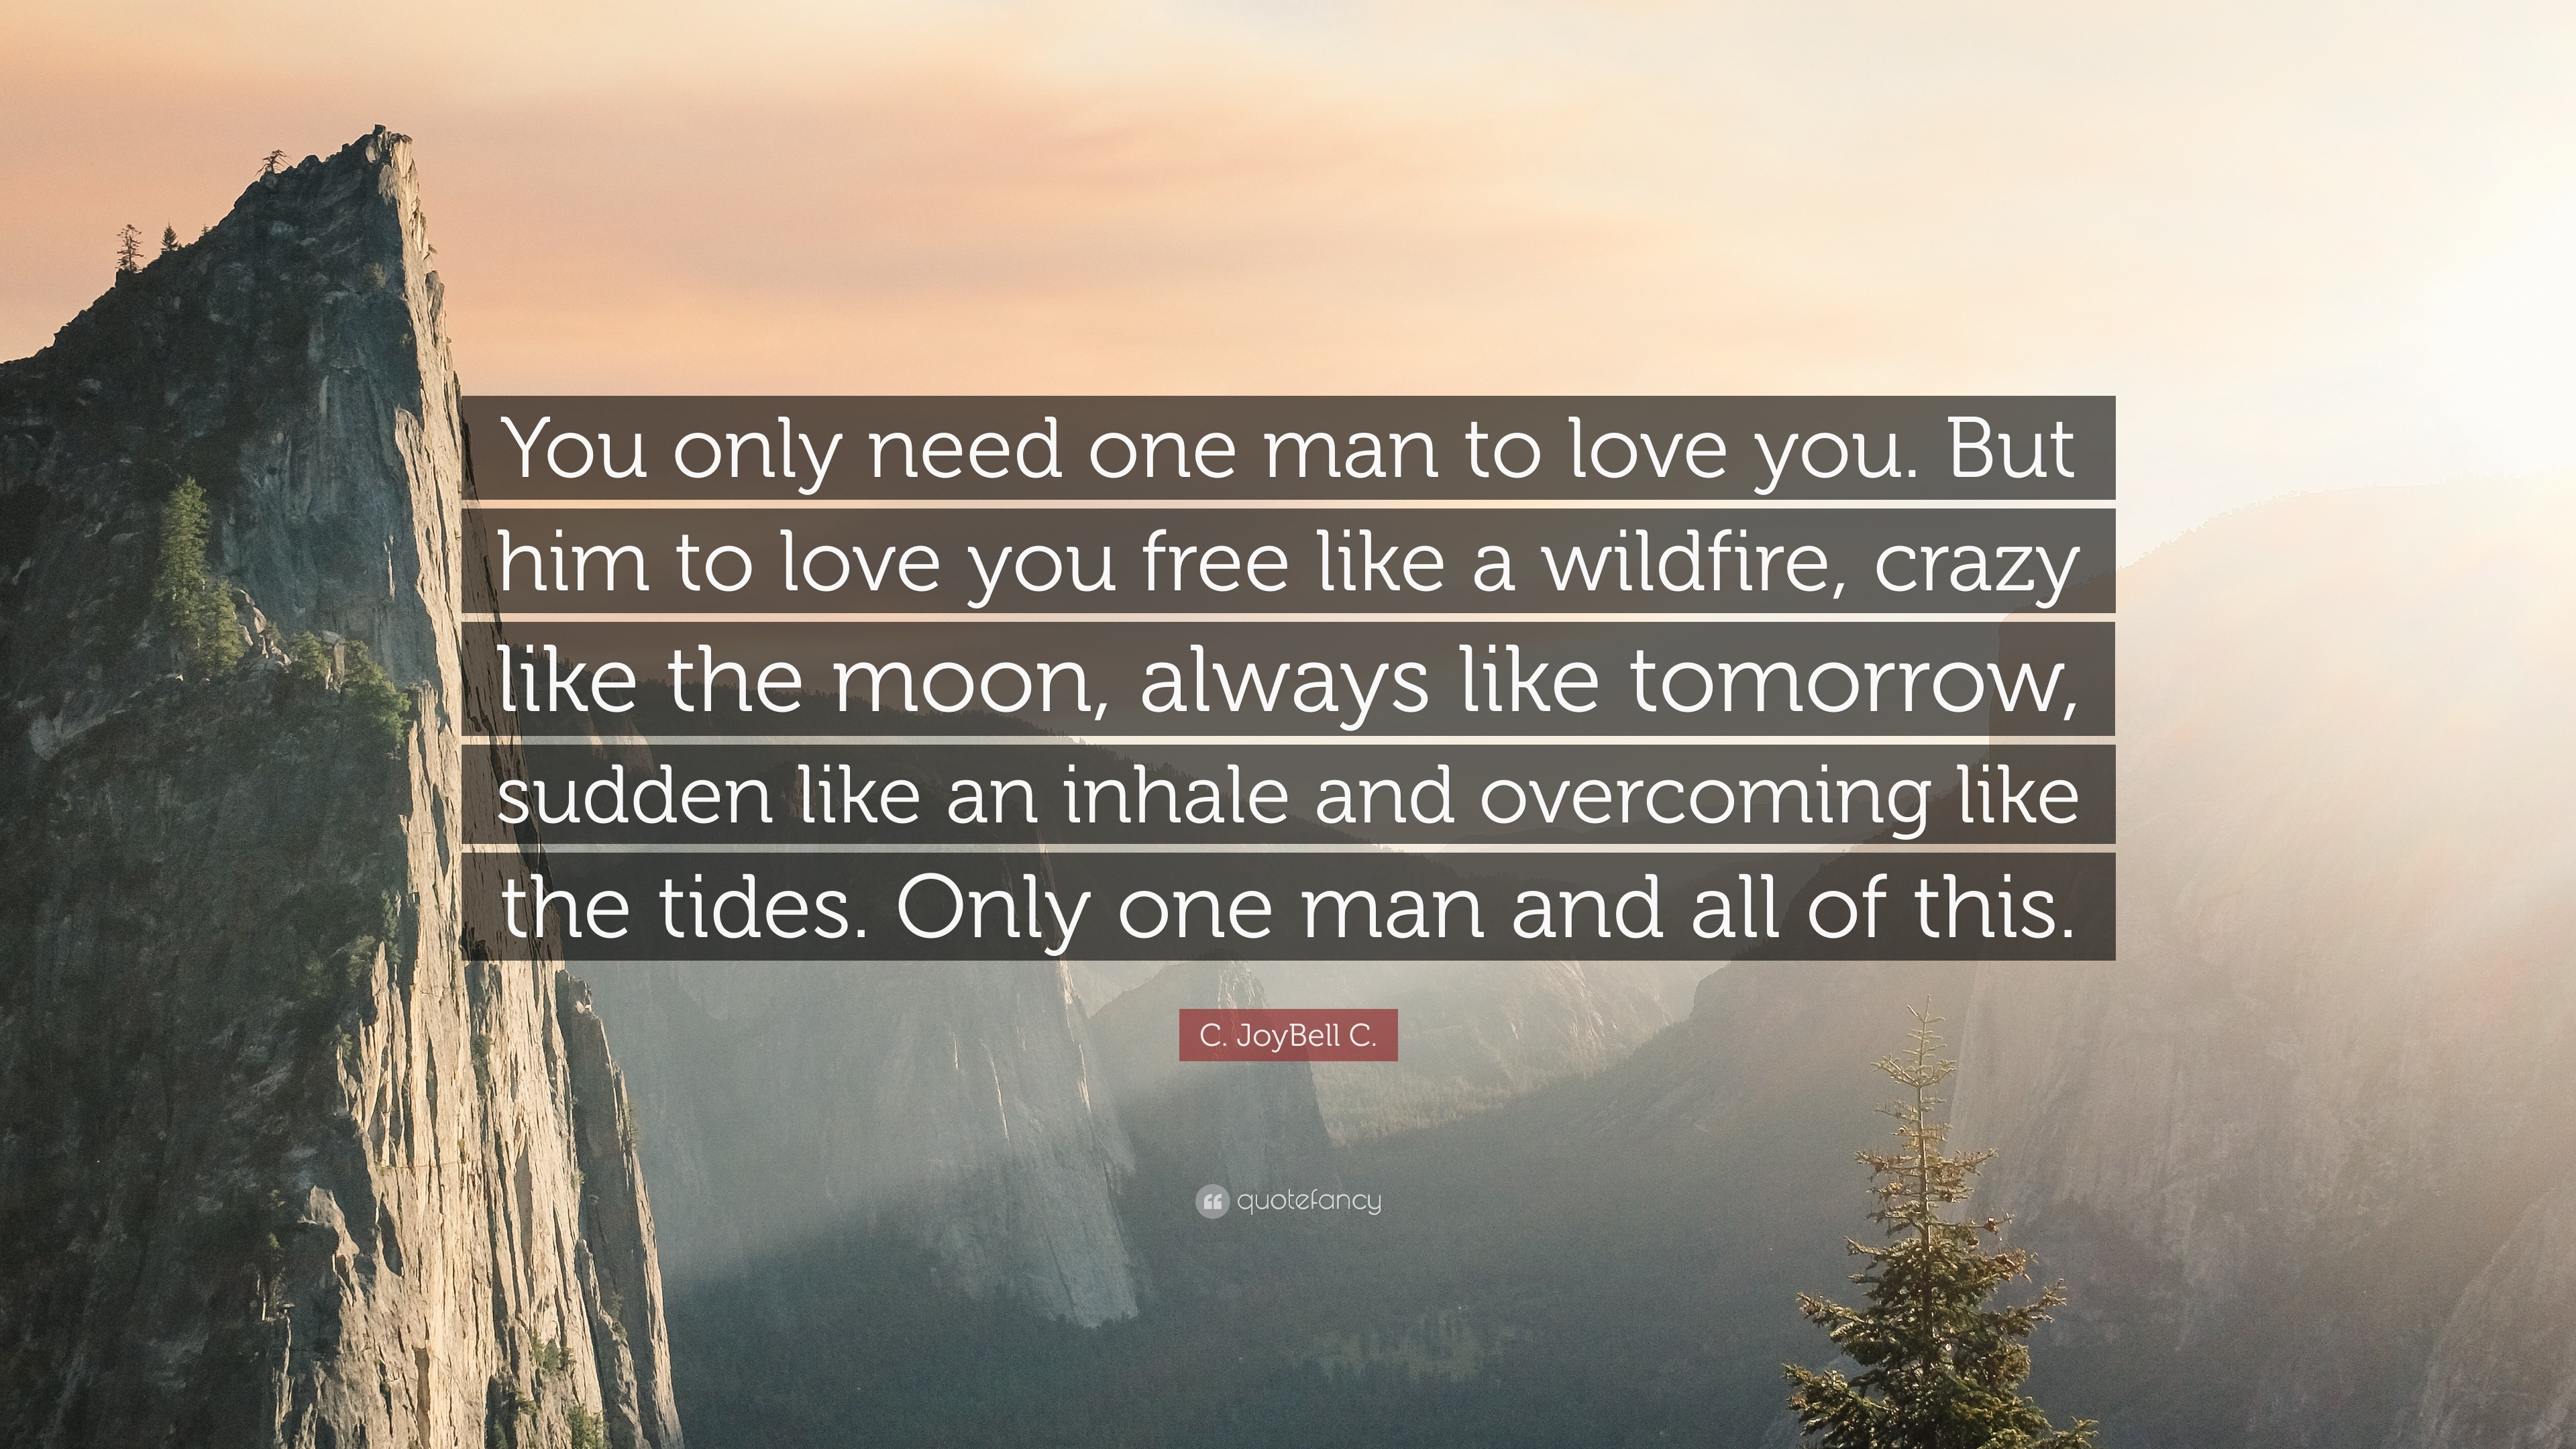 C JoyBell C Quote “You only need one man to love you